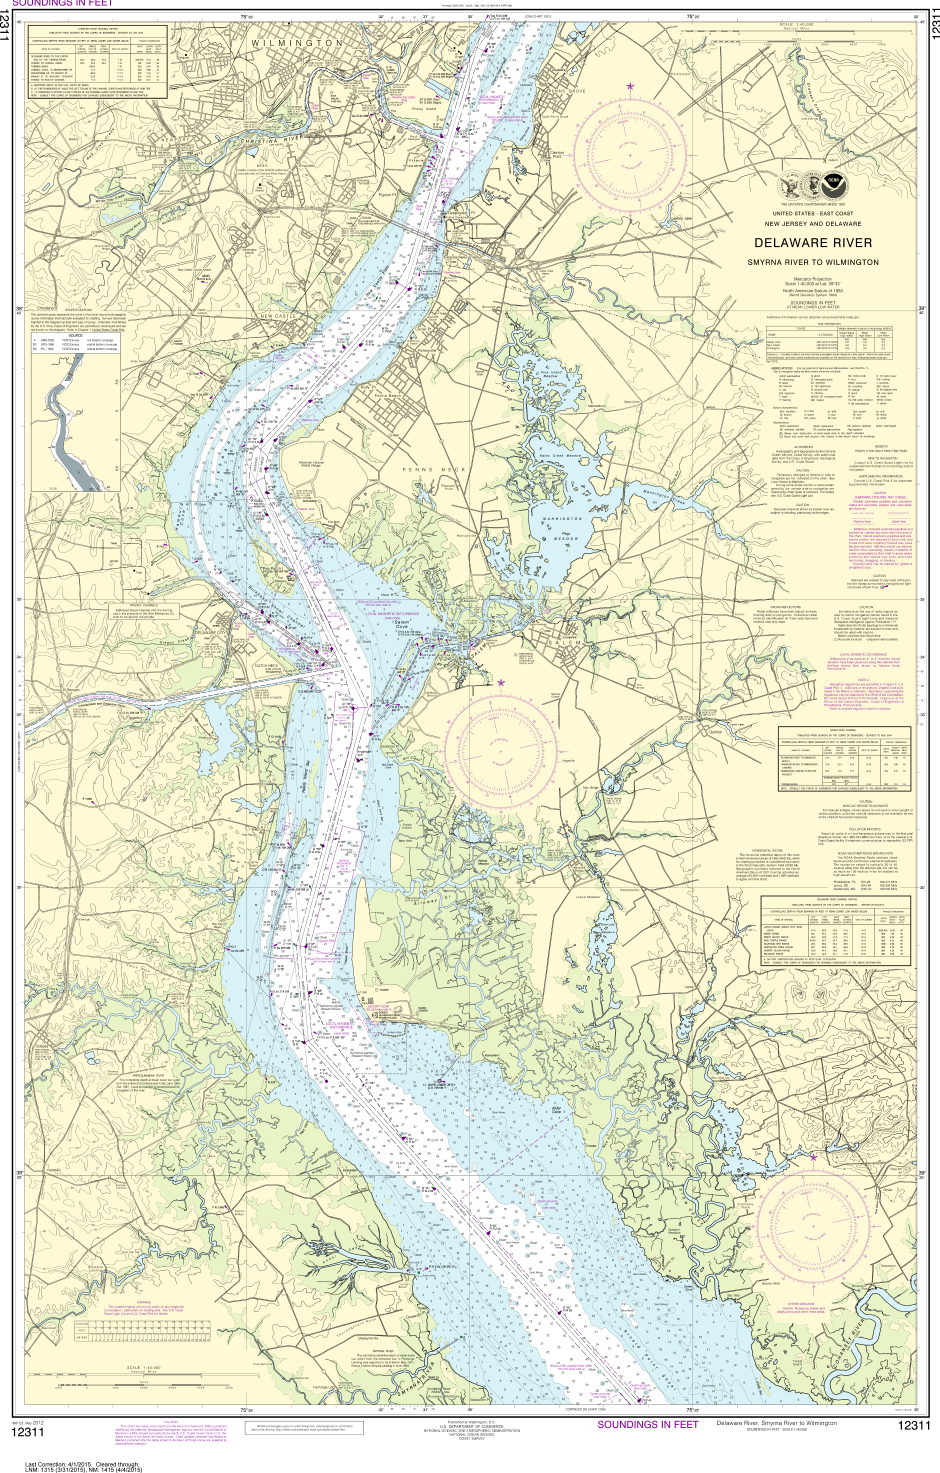 NOAA Print-on-Demand Charts US Waters-Delaware River Smyrna River to Wilmington-12311